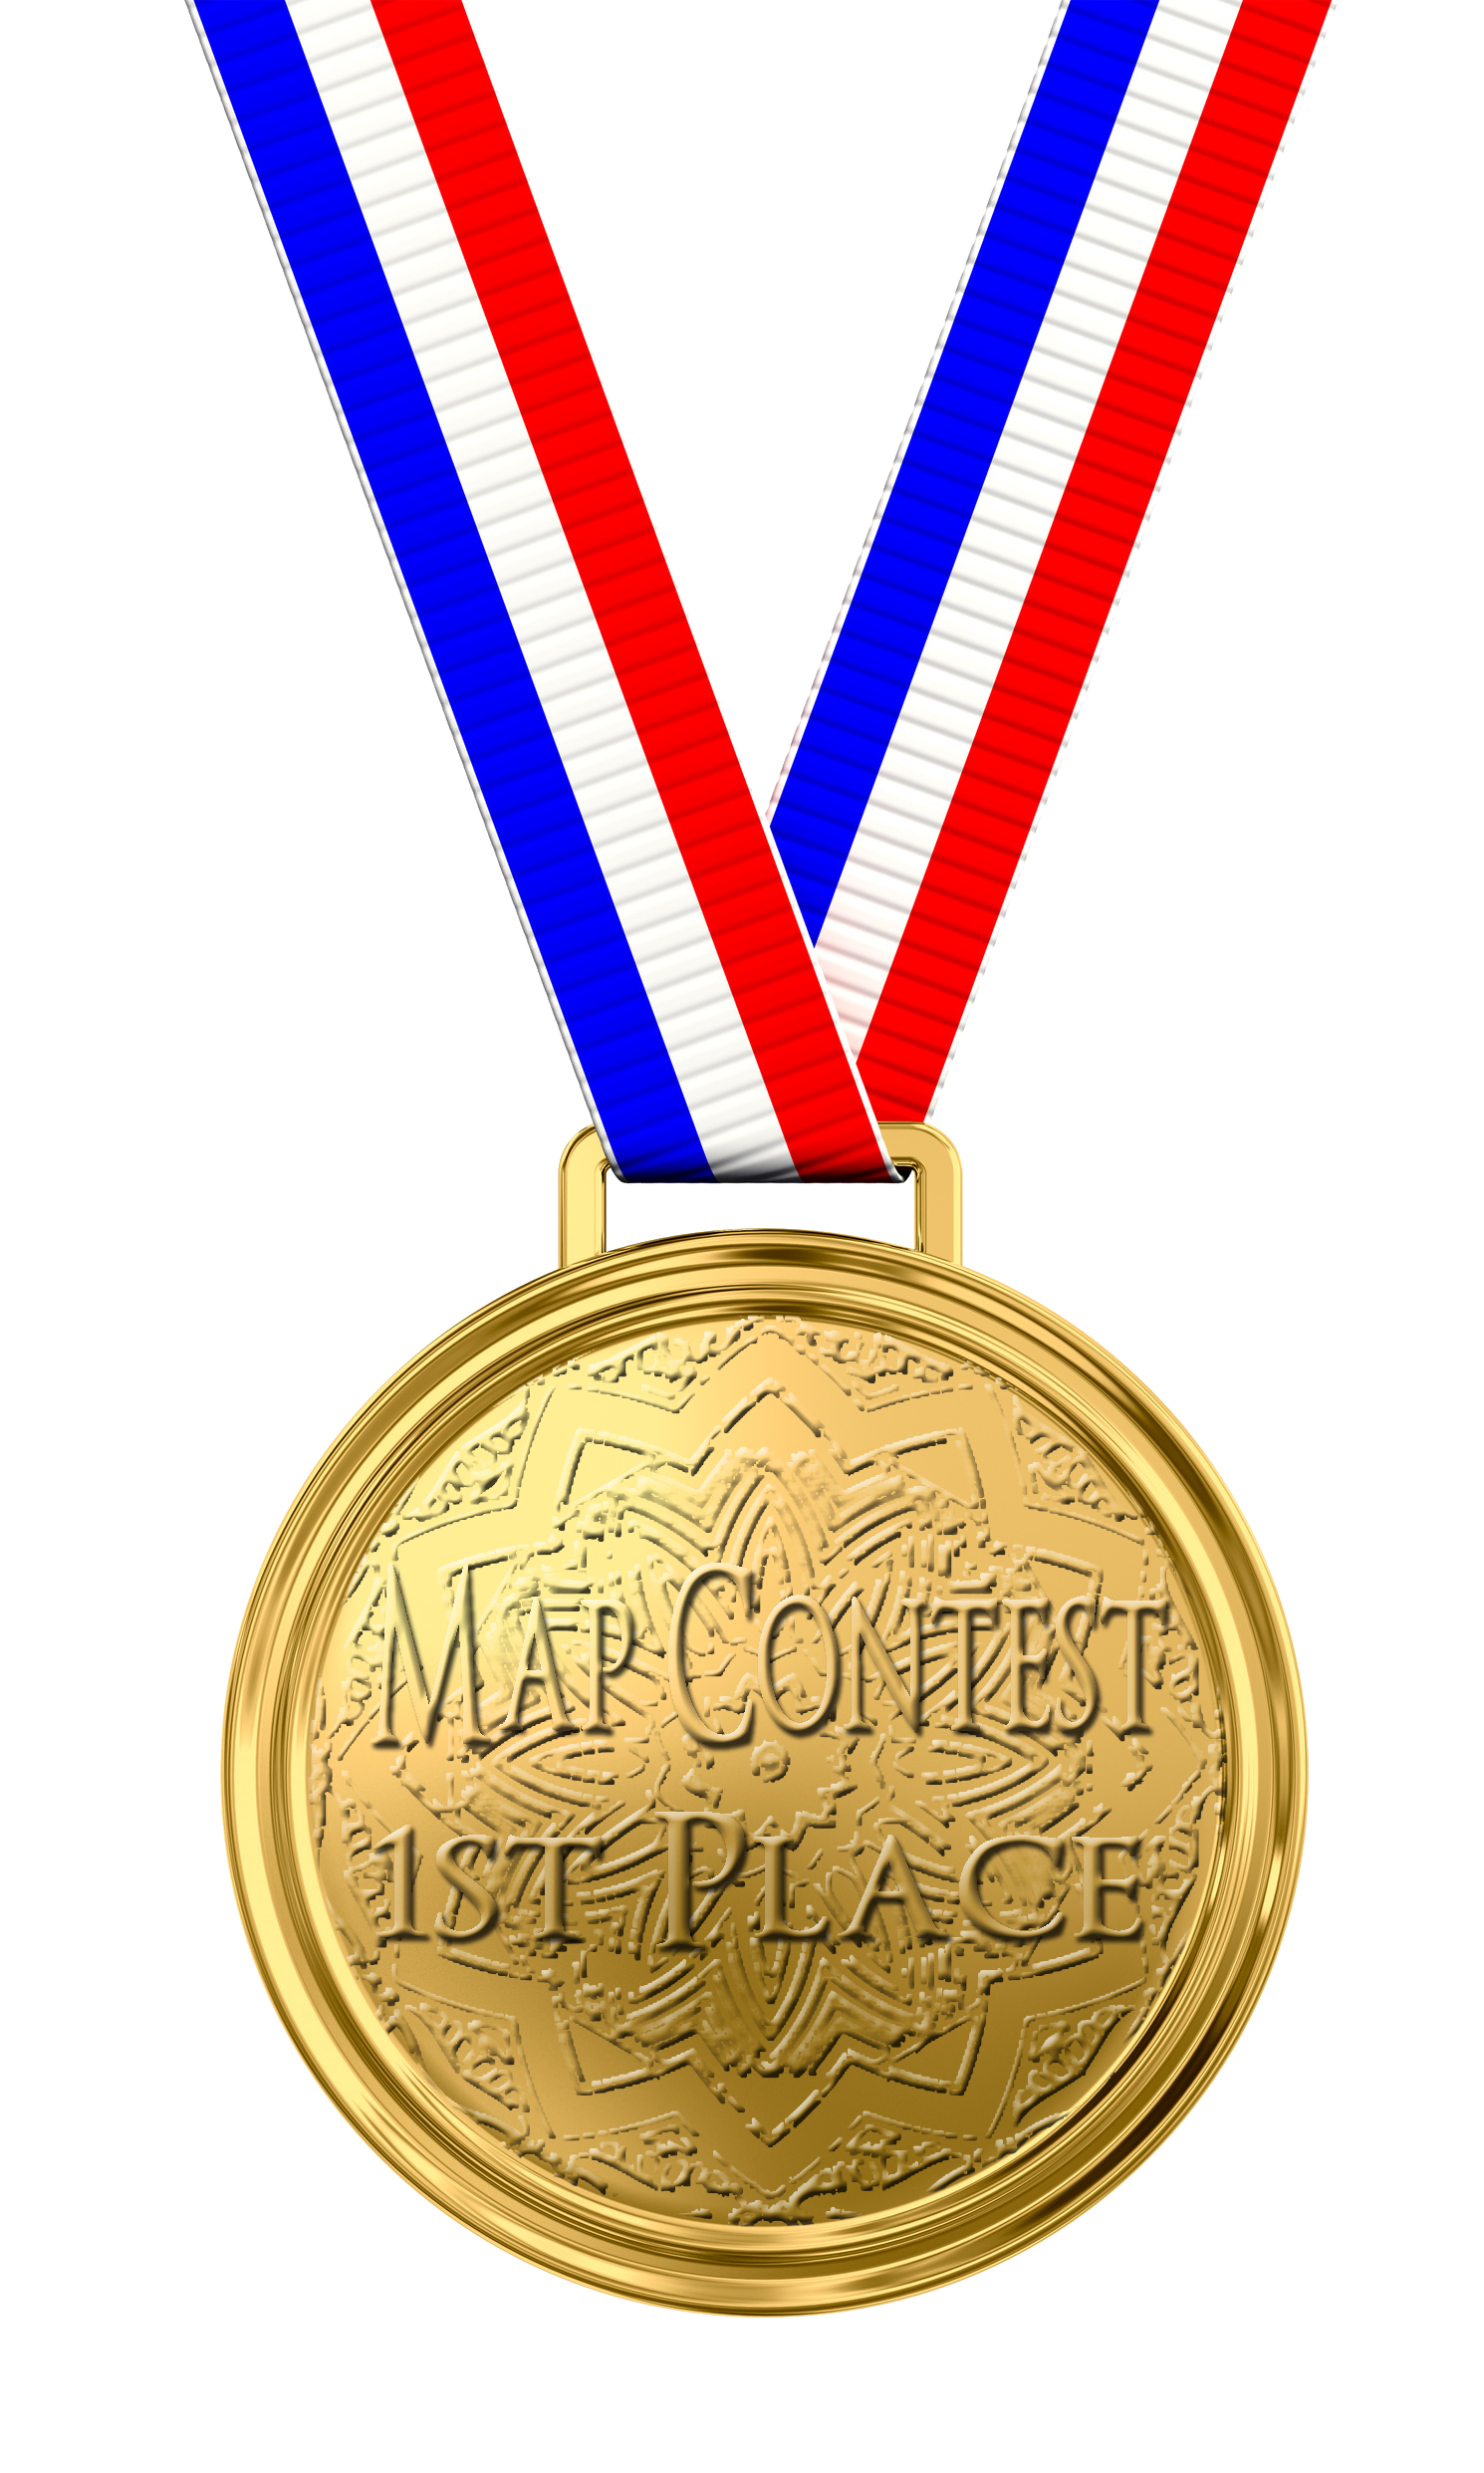 Medal Picture PNG Image